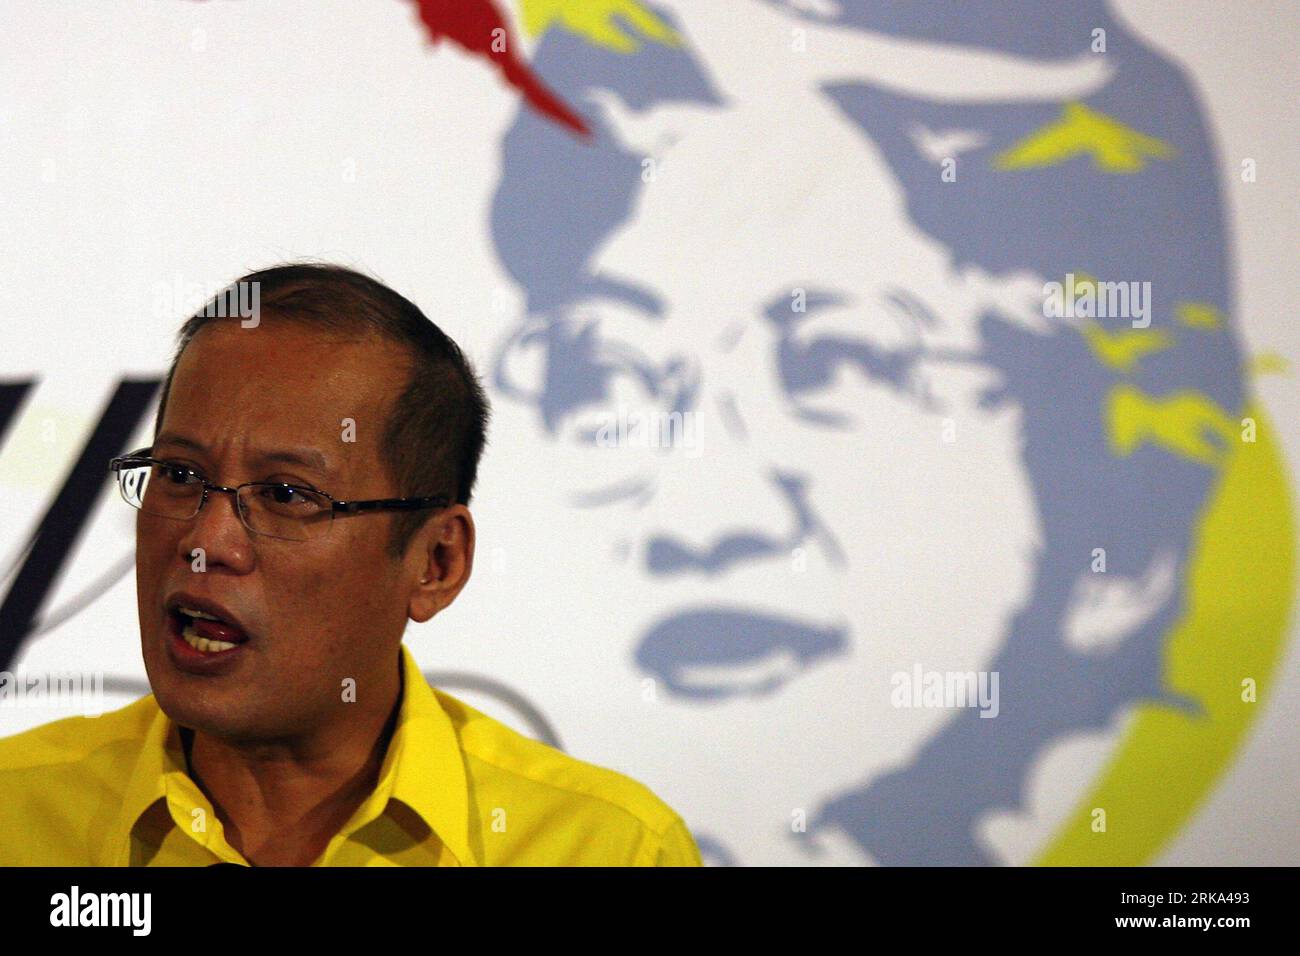 Bildnummer: 54267008  Datum: 01.08.2010  Copyright: imago/Xinhua (100801) -- MANDALUYONG, Aug. 1, 2010 (Xinhua) -- Philippine President Benigno Noynoy Aquino III answers queries from the media during a commemoration of the first death anniversary of her mother, former President Corazon Aquino, at the De La Salle University Gymnasium in Mandaluyong City, Philippines, Aug. 1, 2010. Corazon Aquino, revered by the Filipinos as the country s mother of independence, died of colon cancer last year. (Xinhua/Rouelle Umali) (axy) PHILIPPINES-CORAZON AQUINO-DEATH ANNIVERSARY PUBLICATIONxNOTxINxCHN People Stock Photo